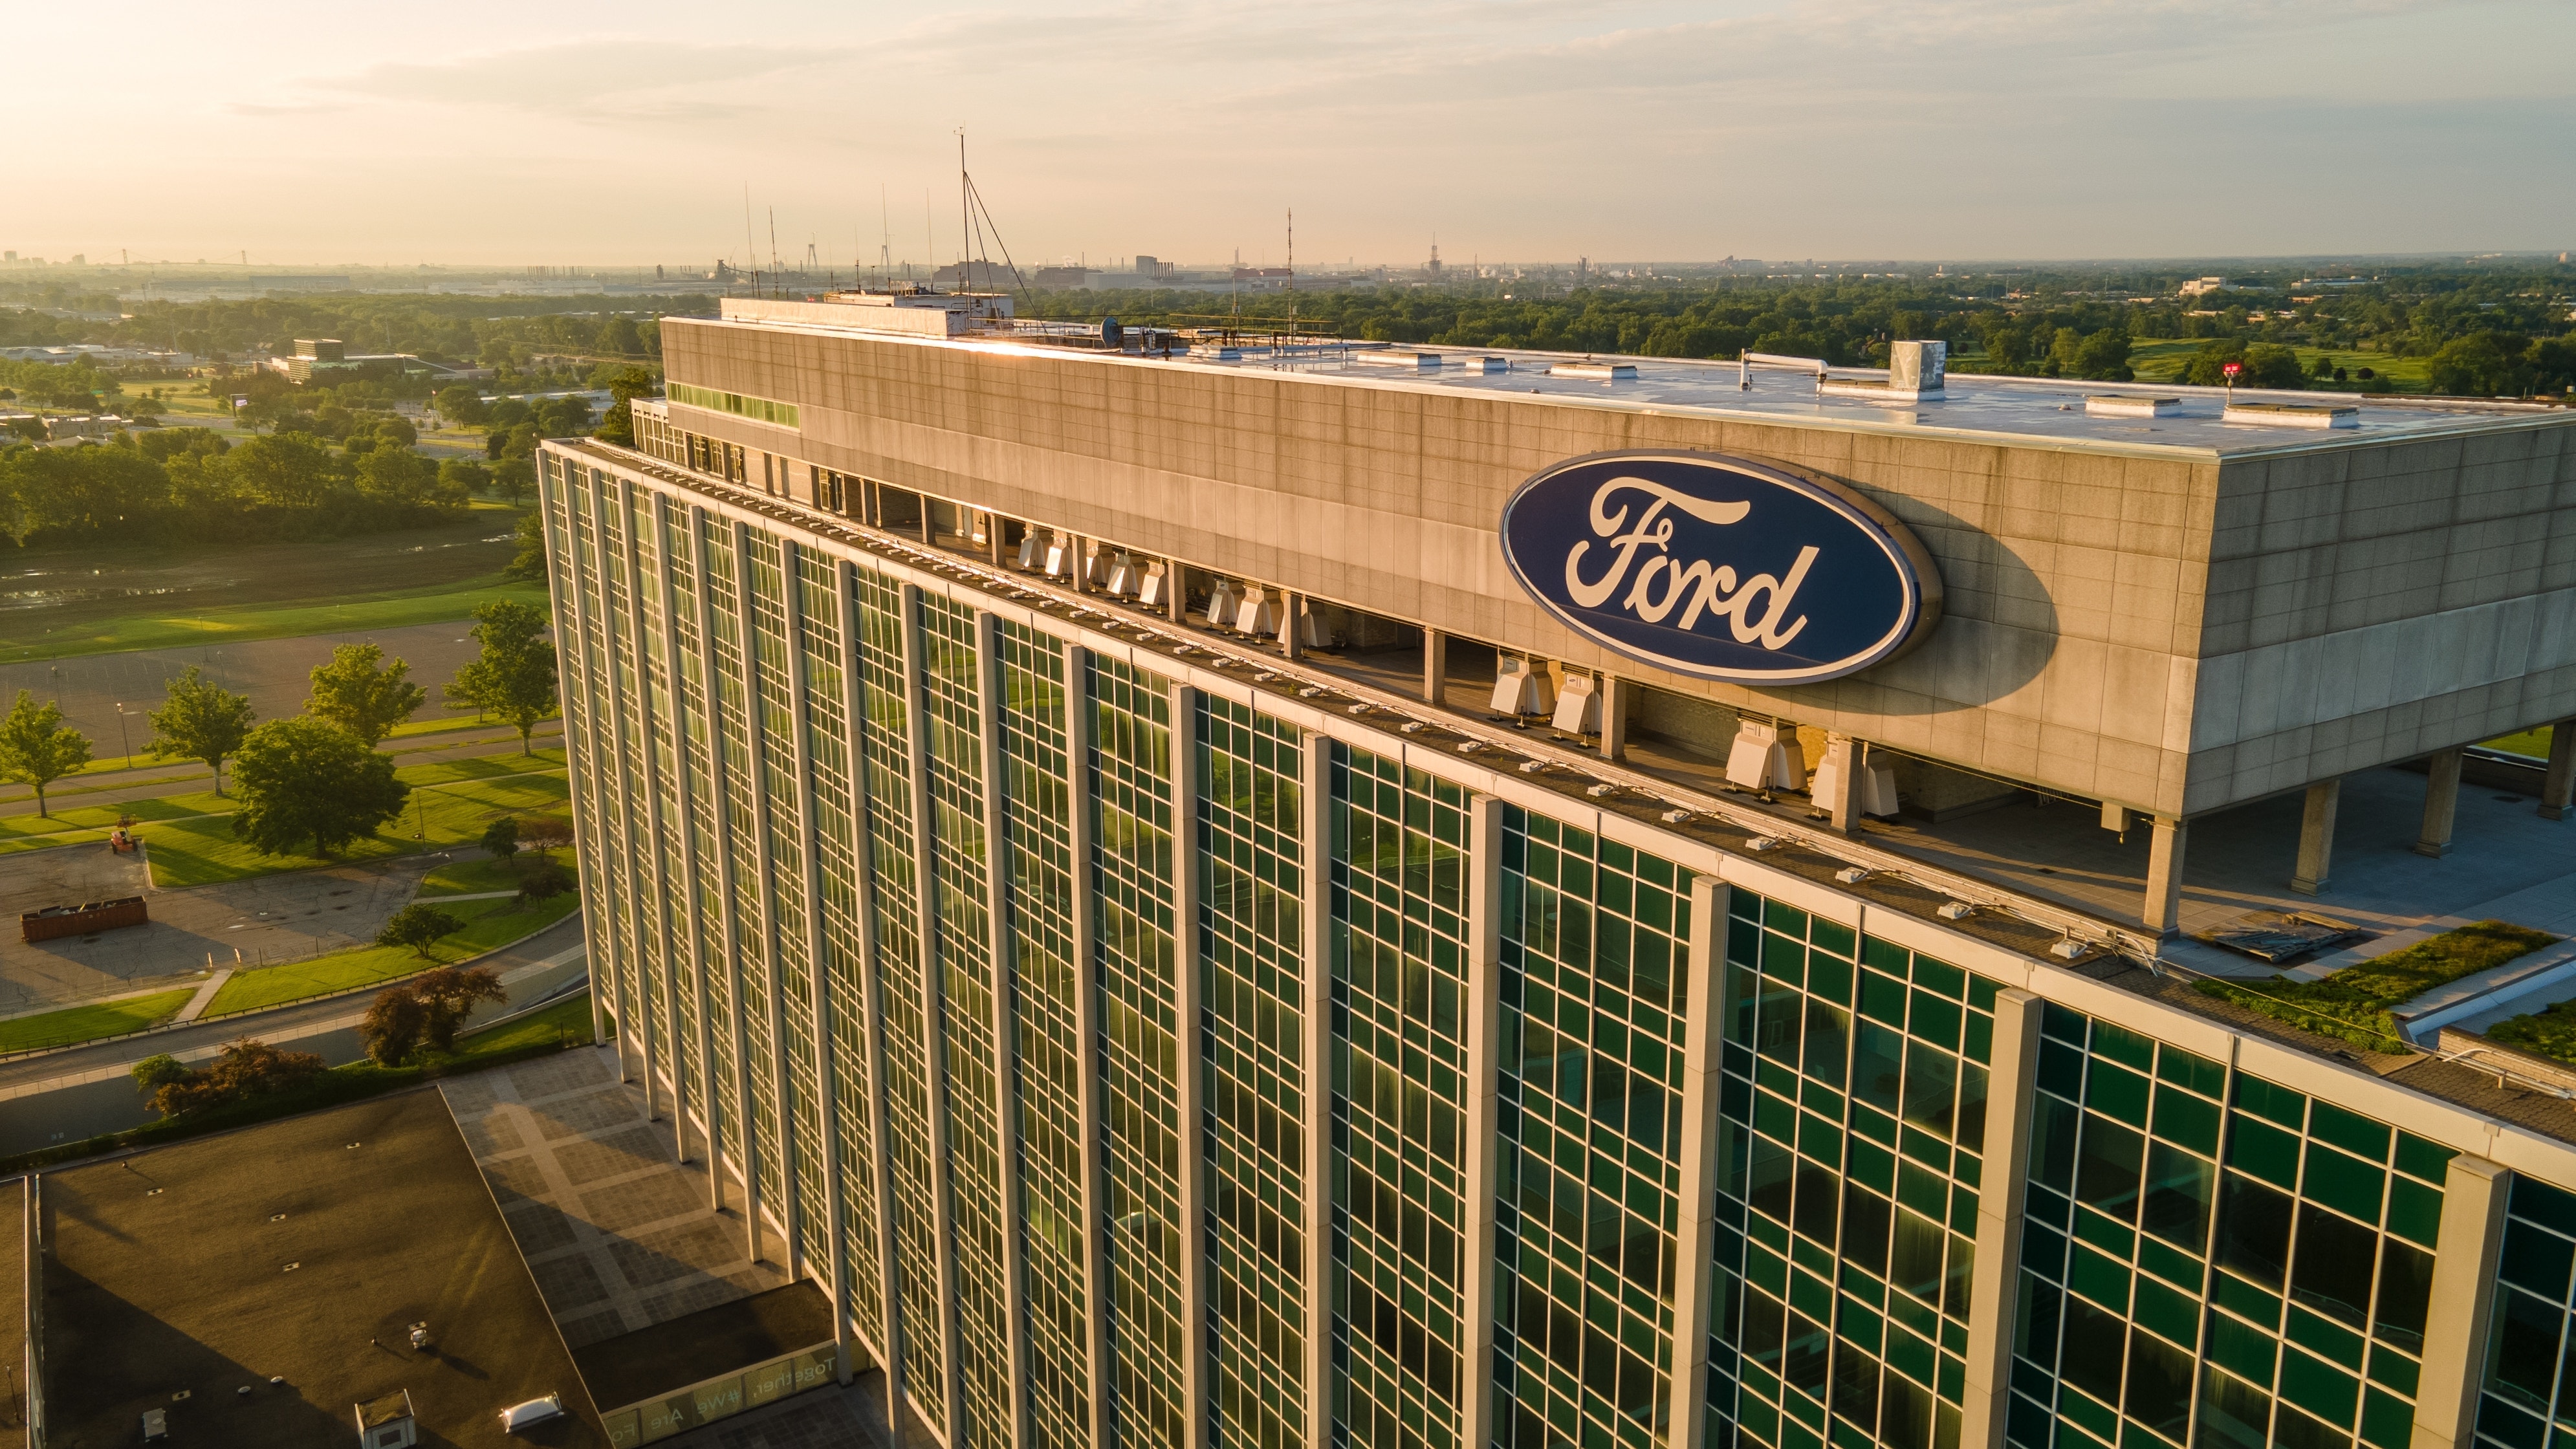 Ford Plunges Following Supply Chain Warning: What's Going On?